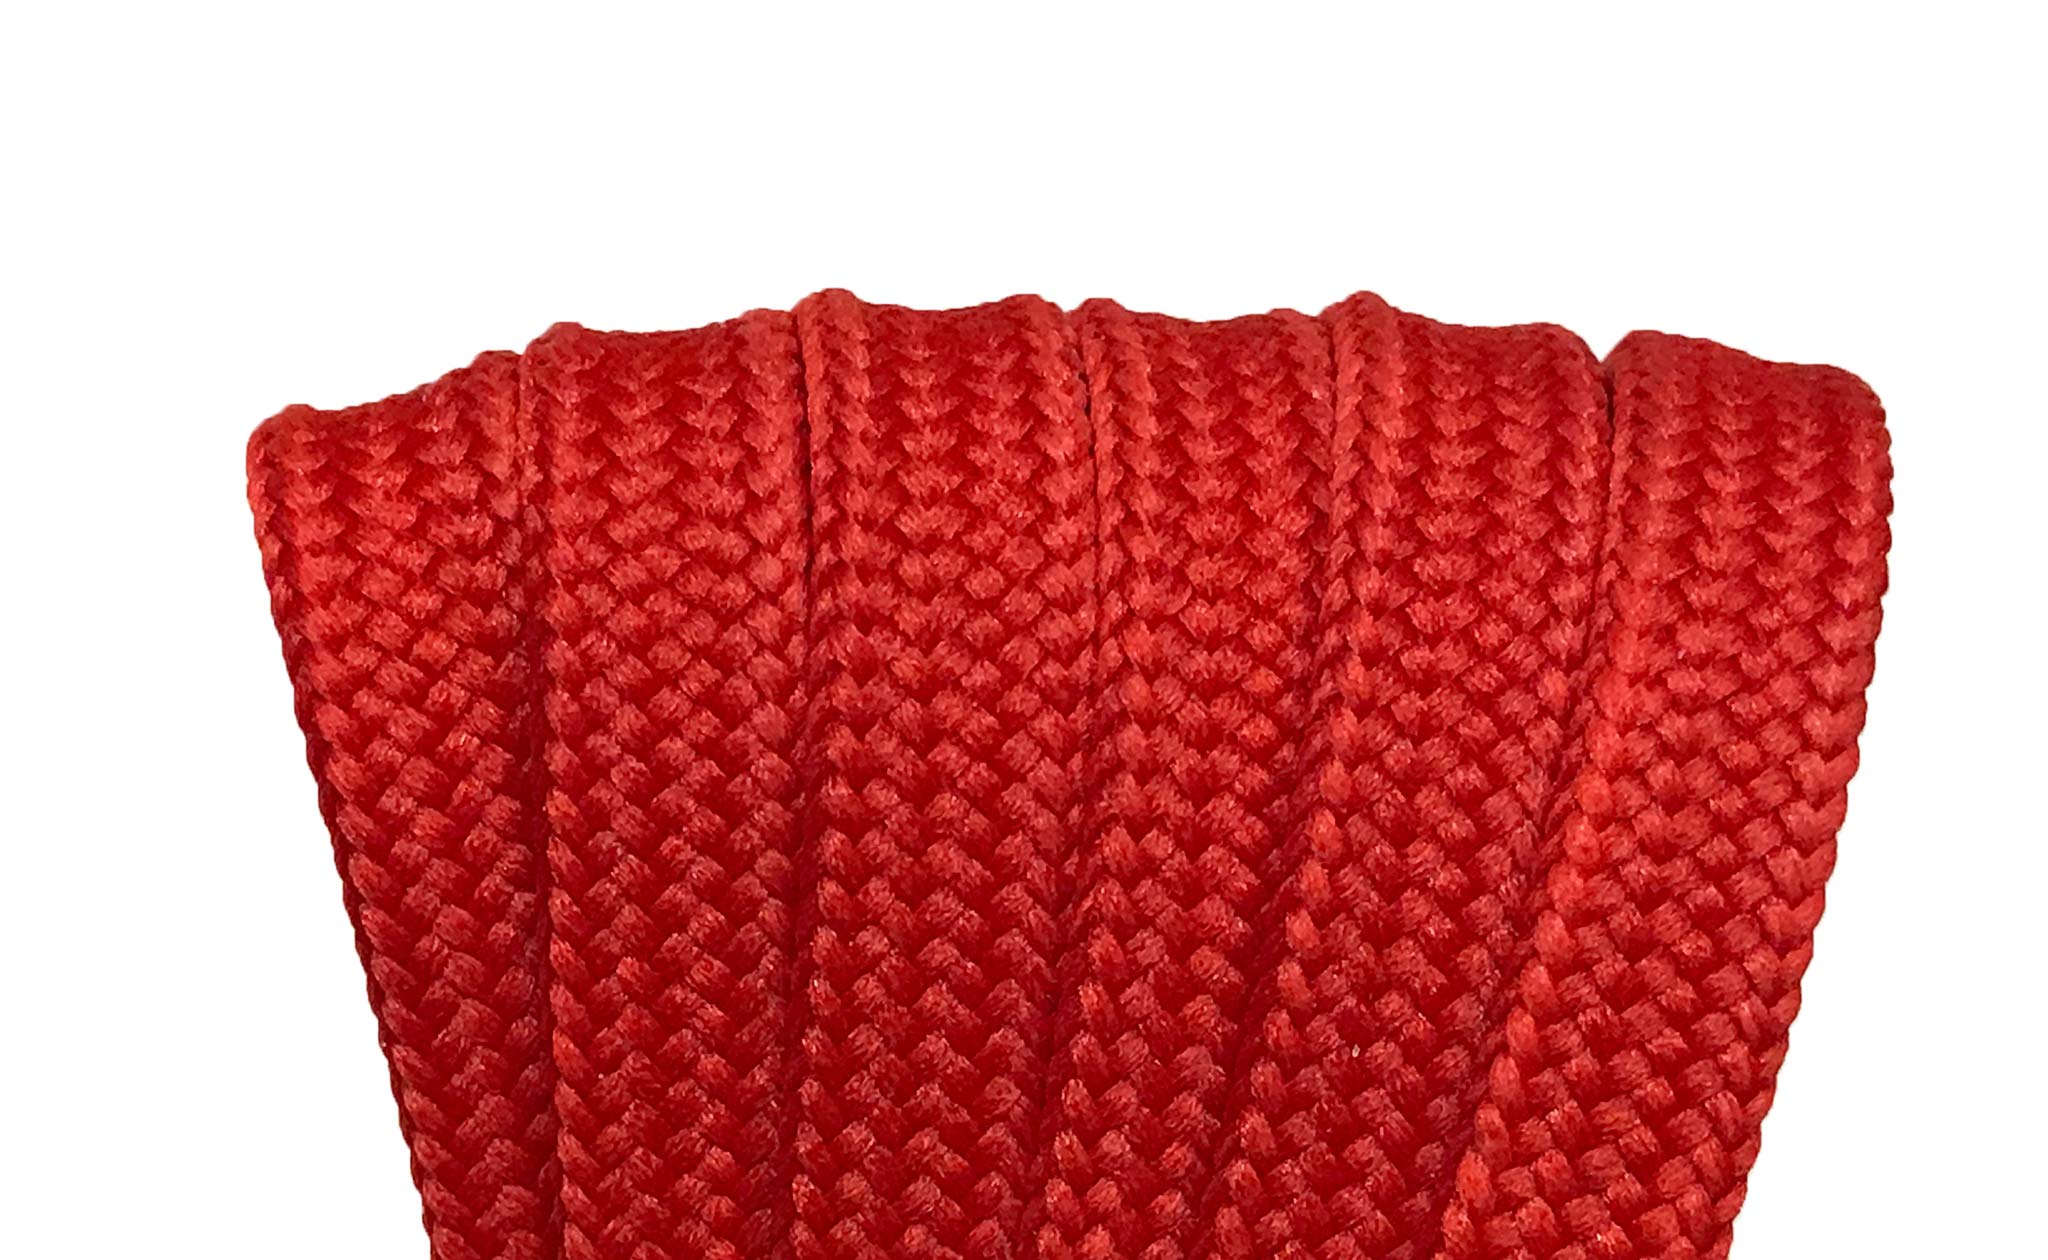 Red Shoelaces | Rope Shoelaces | Stretchy Shoelaces - Lace Kings 27 inch / Red